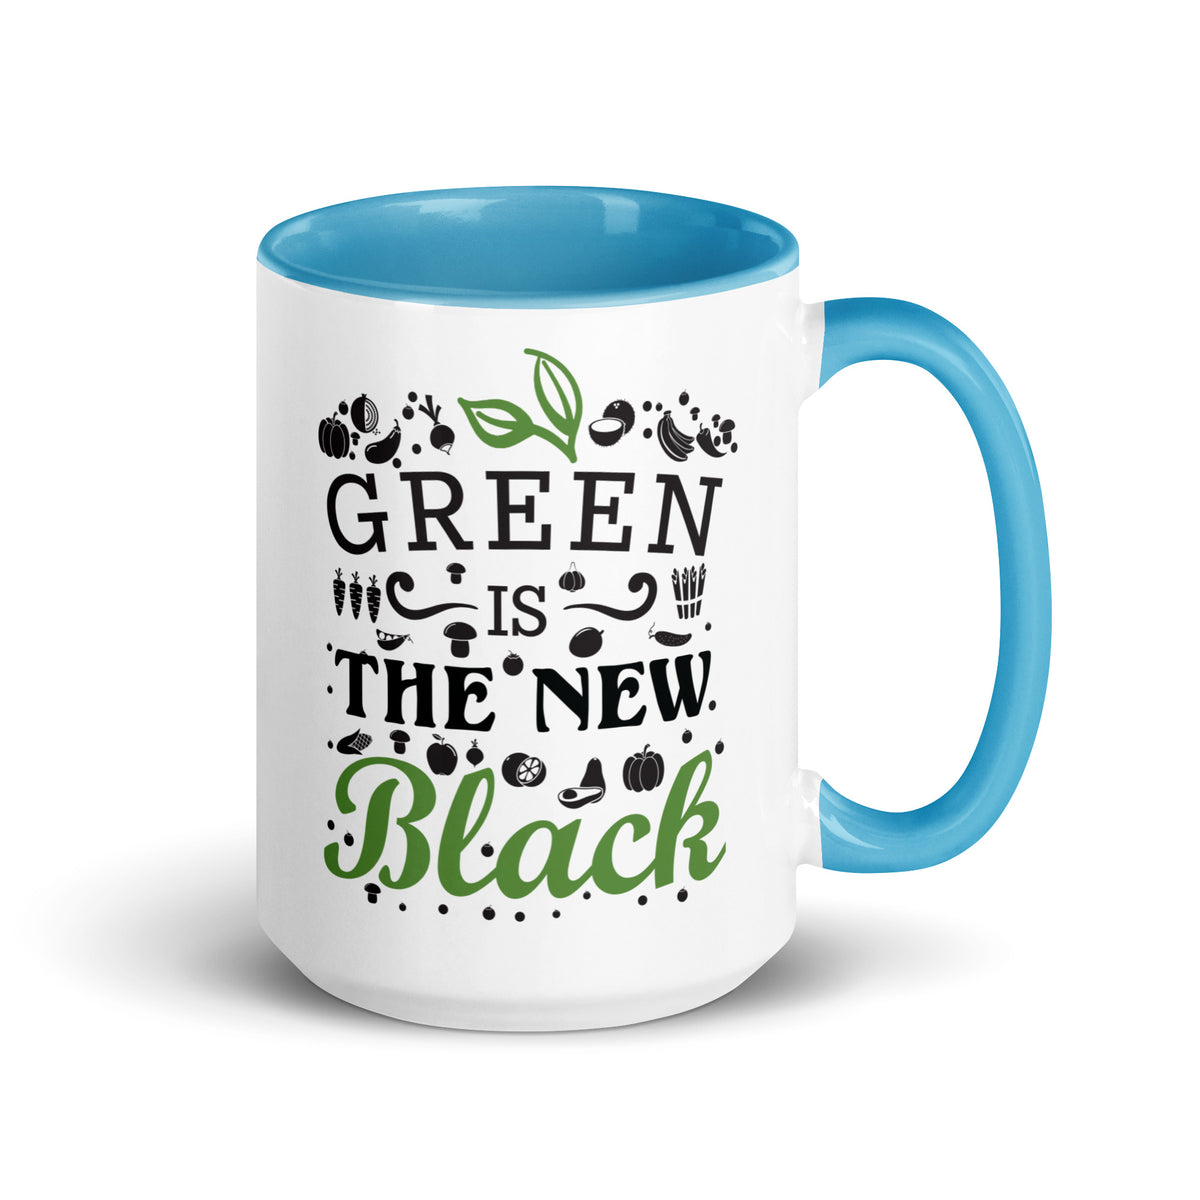 GREEN IS NEW BLACK Mug with Color Inside